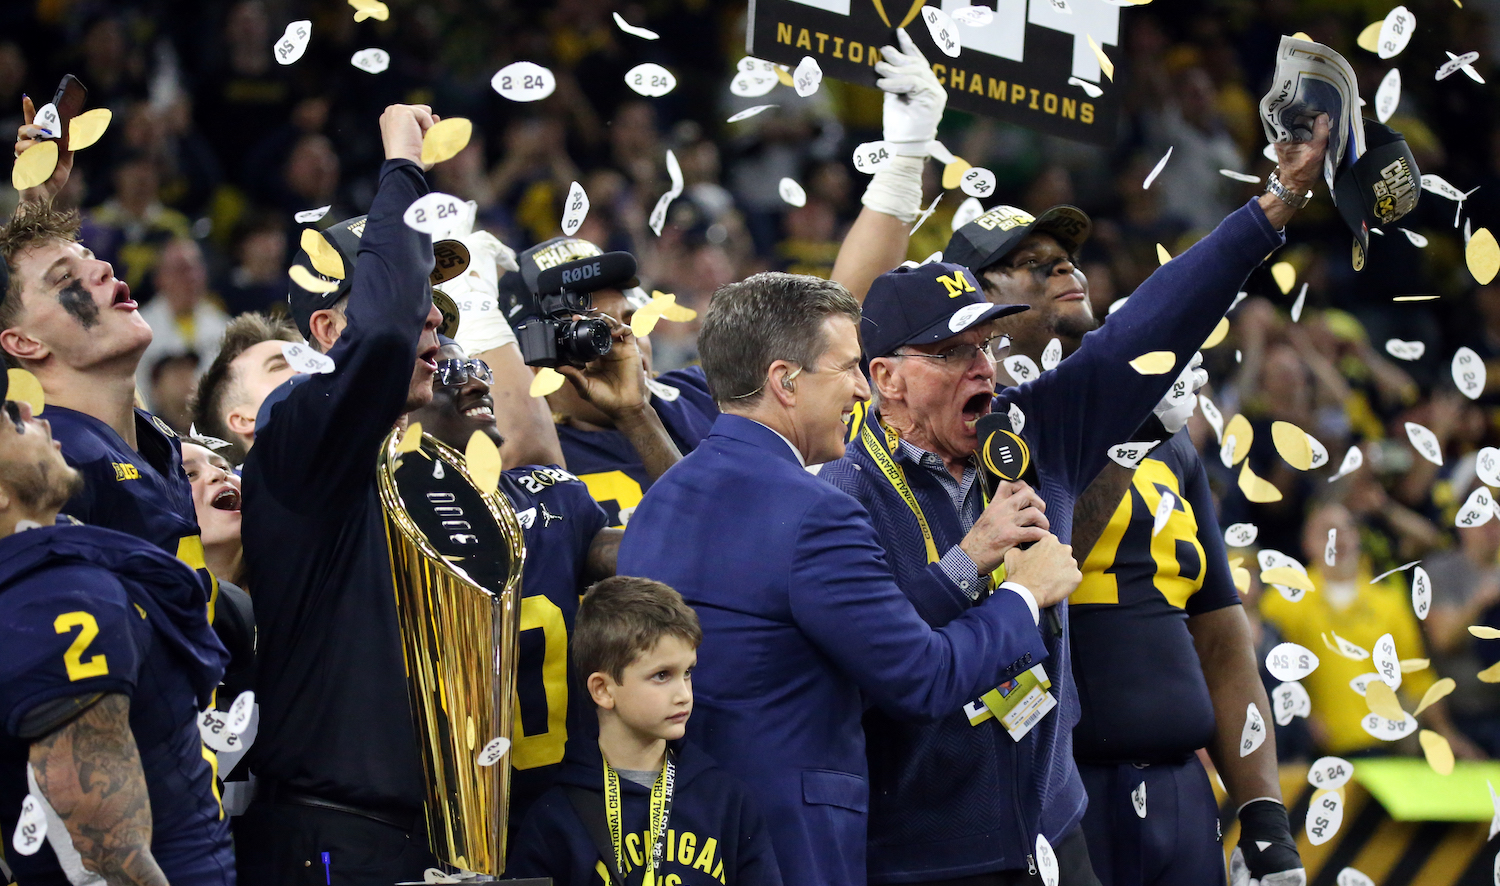 HOUSTON, TX - JANUARY 08: Jack Harbaugh, father of Head Coach Jim Harbaugh of the Michigan Wolverines, leads the fans in a chant to celebrate winning the game during the Michigan Wolverines versus the Washington Huskies CFP National Championship game on January 8, 2024, at NRG Stadium in Houston, TX. (Photo by Leslie Plaza Johnson/Icon Sportswire)